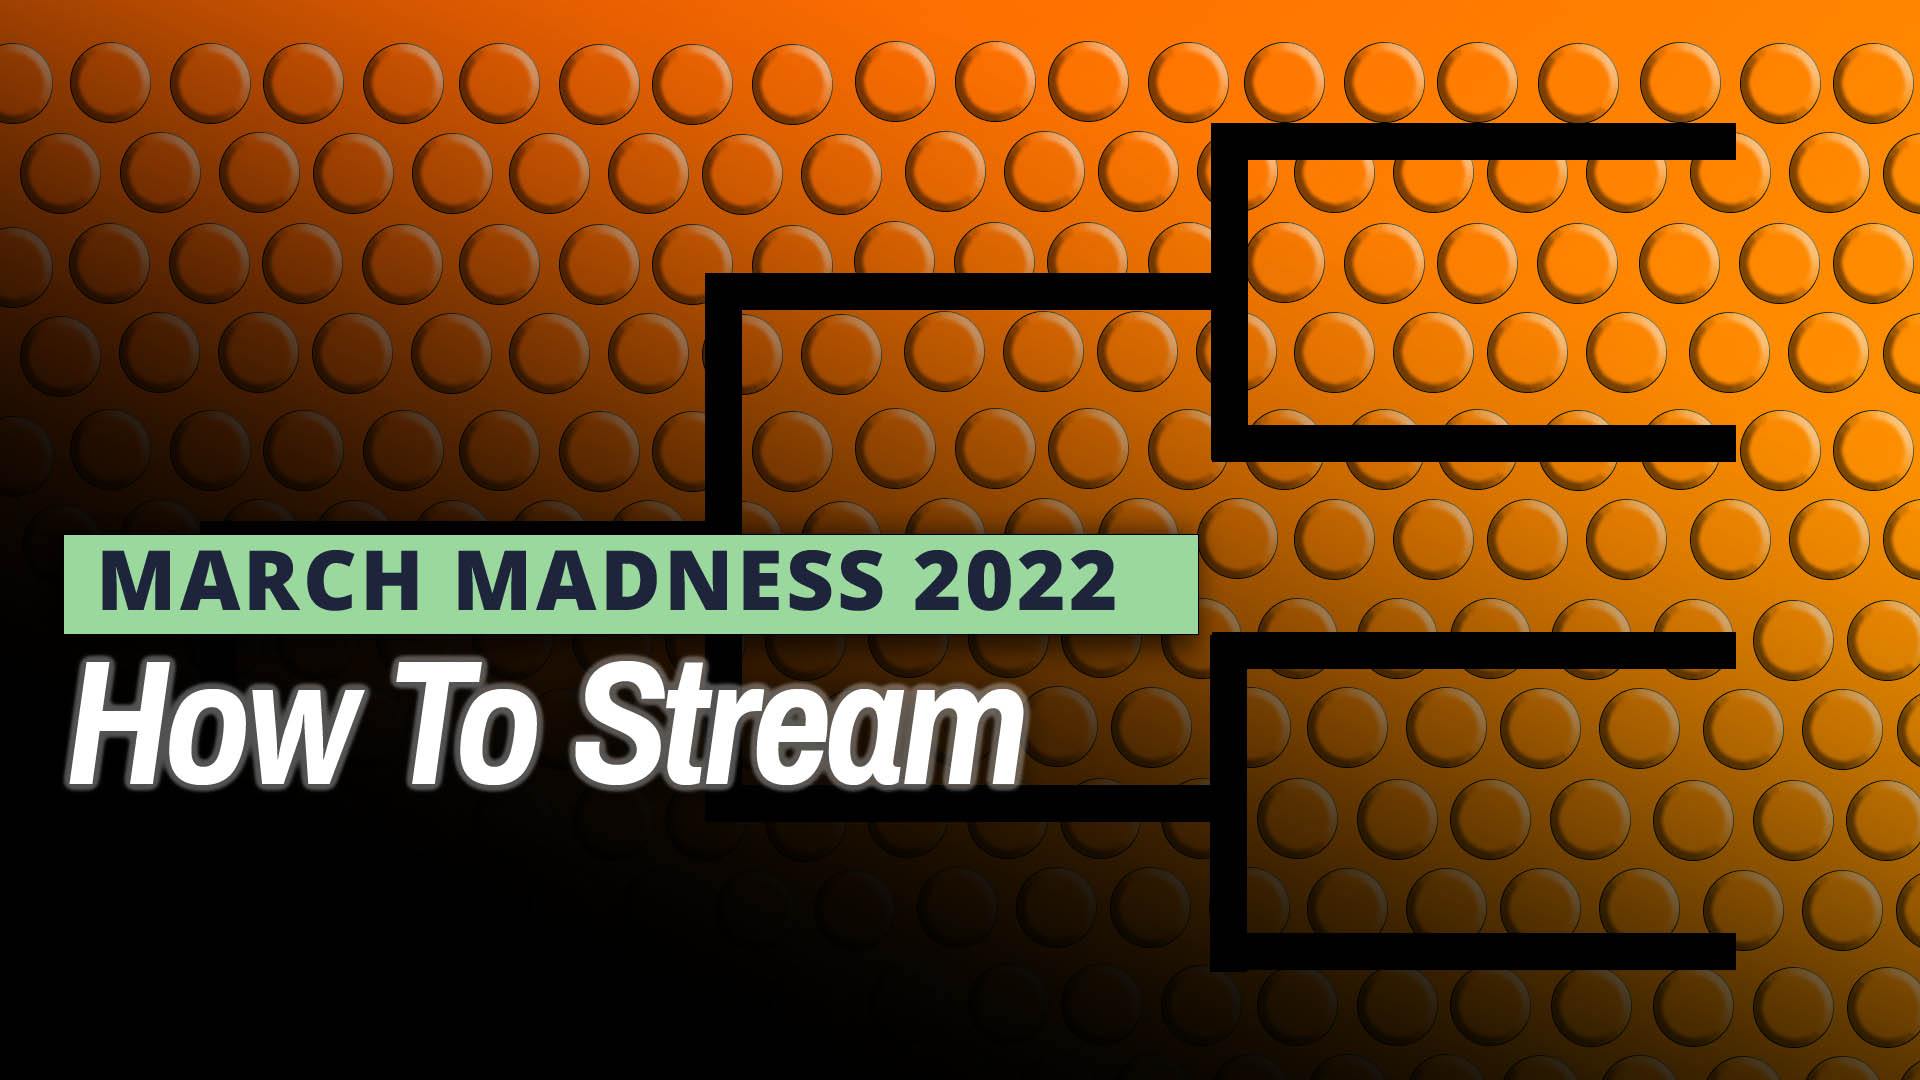 Video: How to Stream March Madness 2022